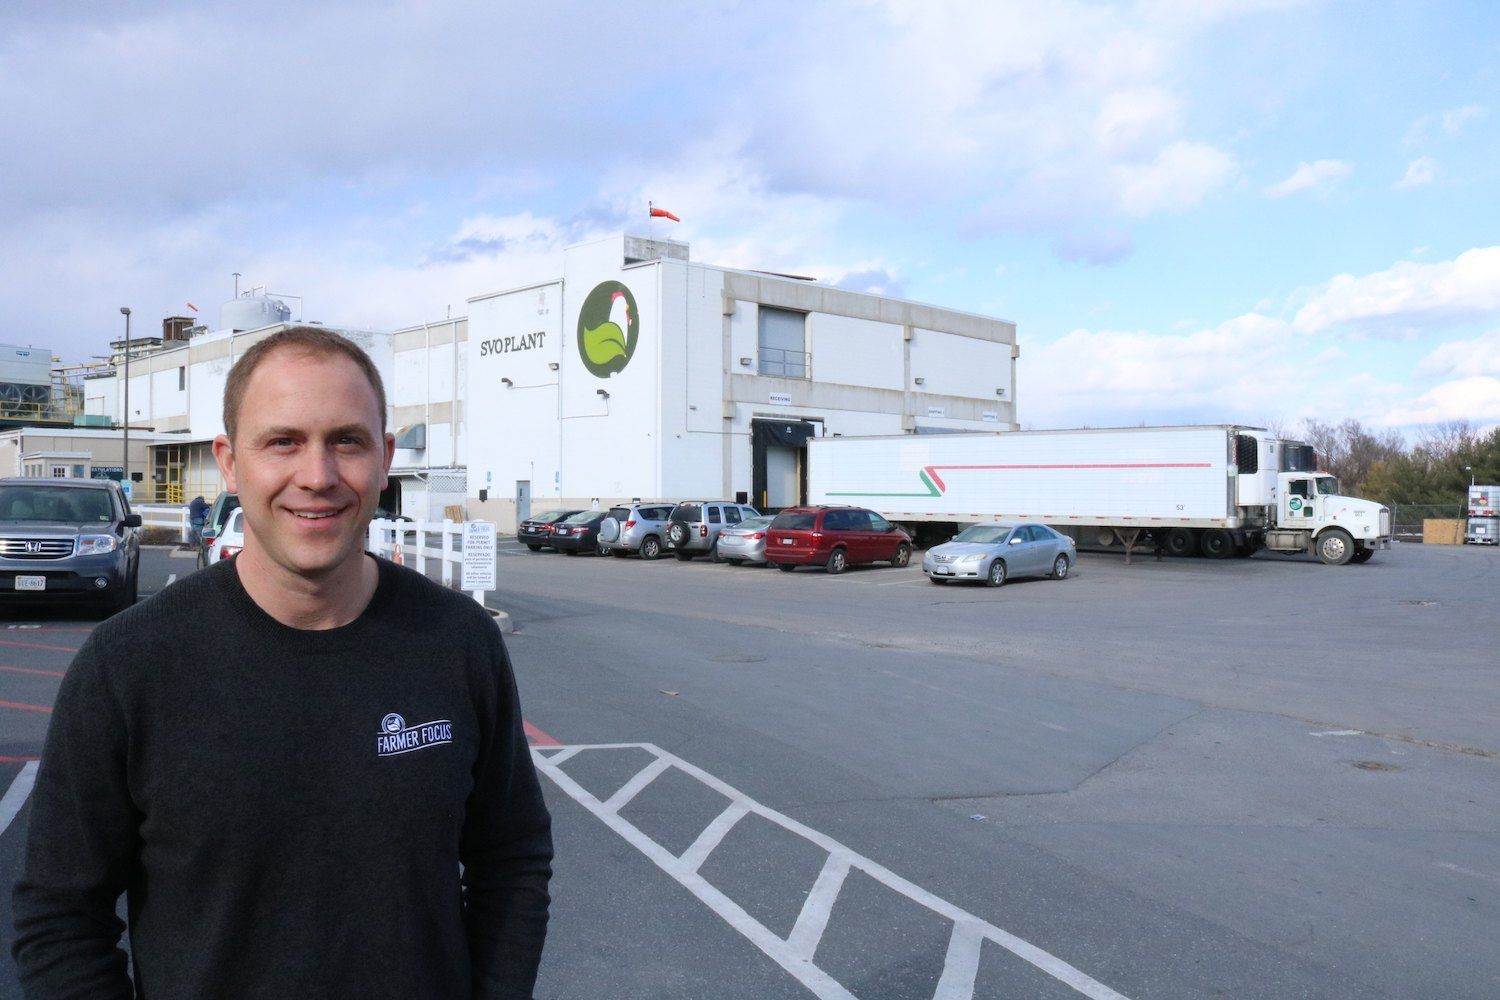 Corwin Heatwole, Shenandoah Valley Organic's founder and CEO, began processing organic chickens at this plant in Harrisonburg, Virginia, in 2014. (March 2020)